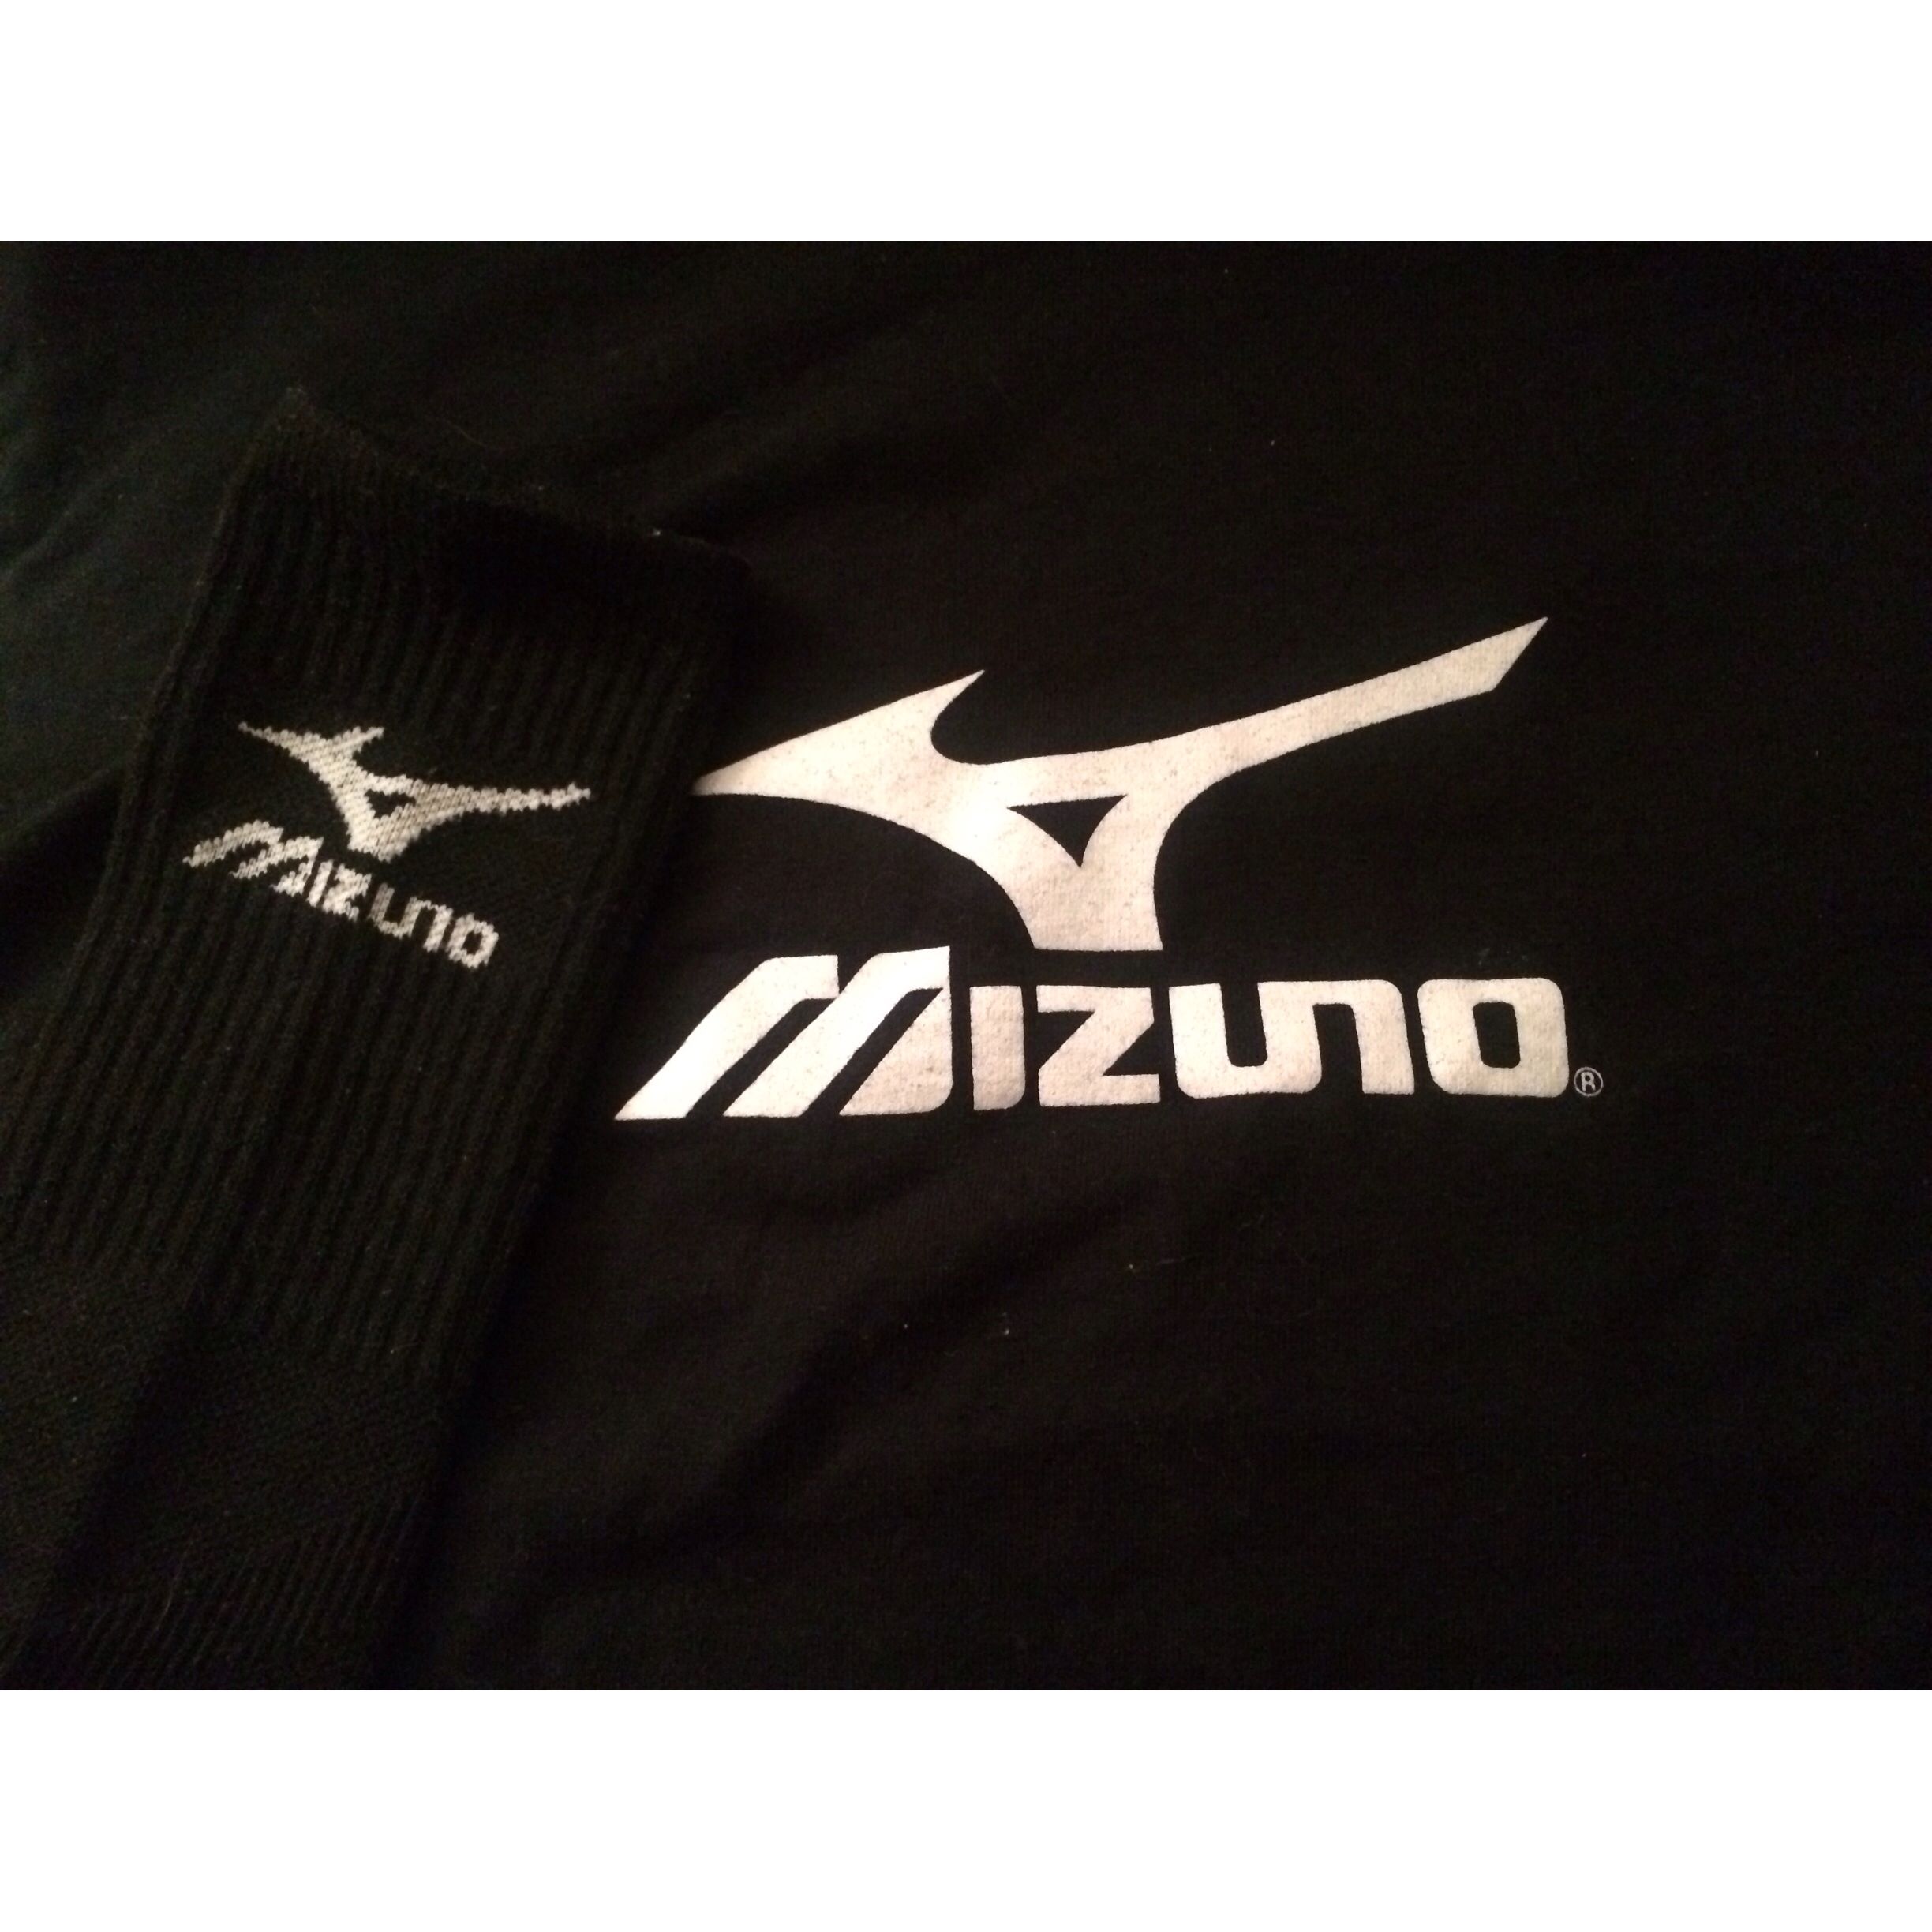 6 Get a picture of the logo: The #Mizuno logo on my socks.